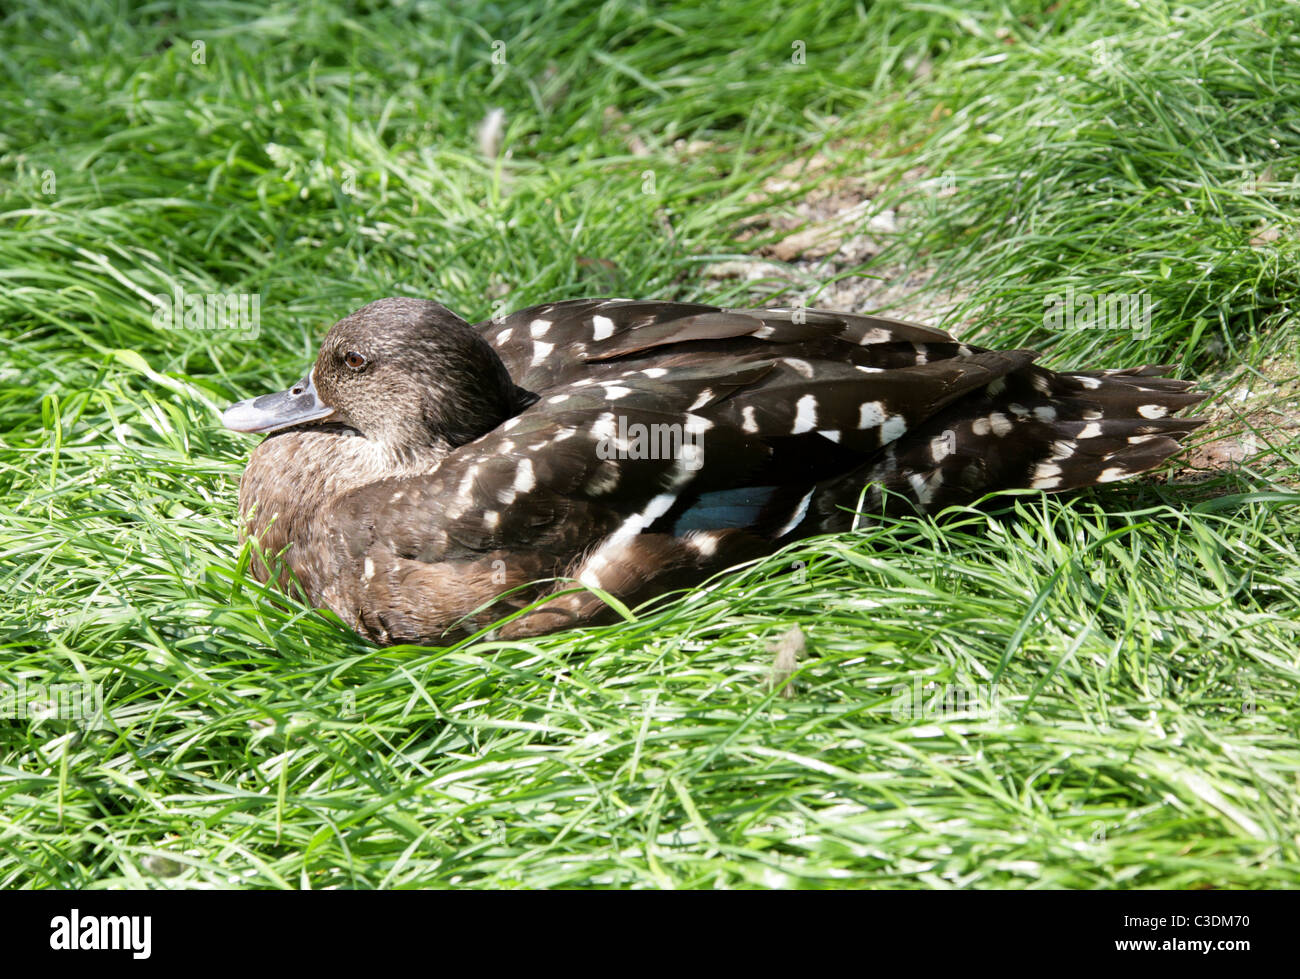 African Black Duck, Anas sparsa, Anatidae. Native to Africa, South of the Sahara. Stock Photo